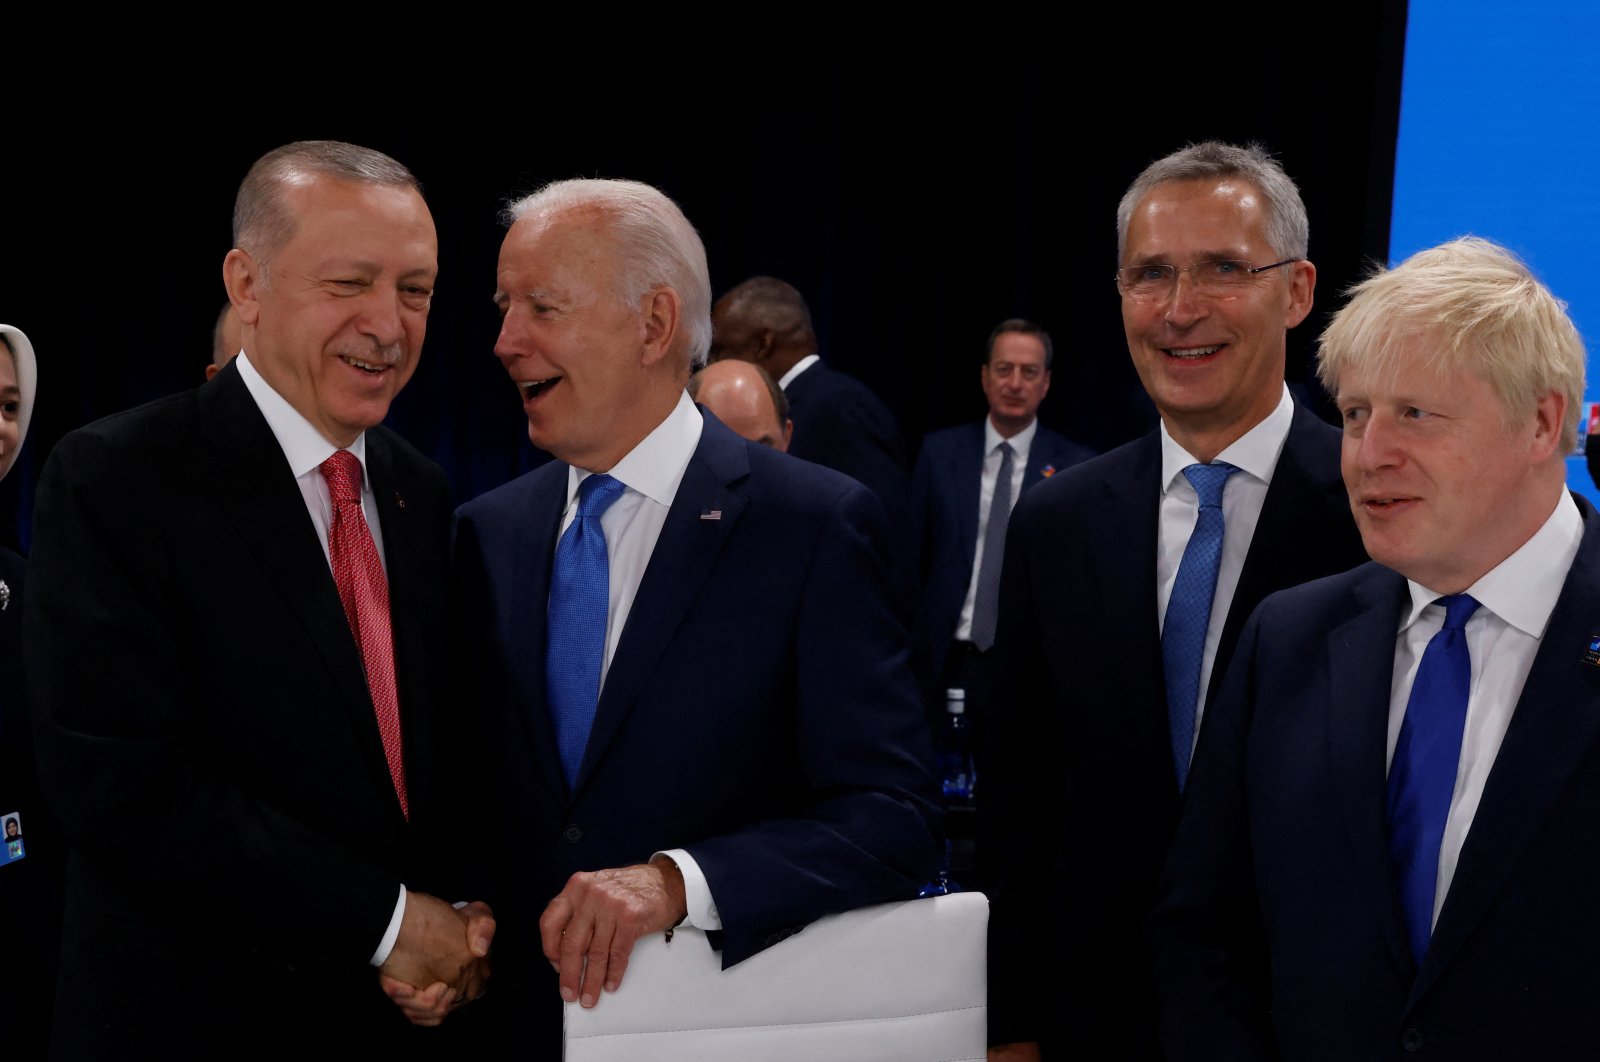 President Recep Tayyip Erdoğan (L), U.S. President Joe Biden (2nd L), NATO Secretary-General Jens Stoltenberg (2nd R) and British Prime Minister Boris Johnson attend the round table of the first meeting of a NATO summit in Madrid, Spain, June 29, 2022. (REUTERS)